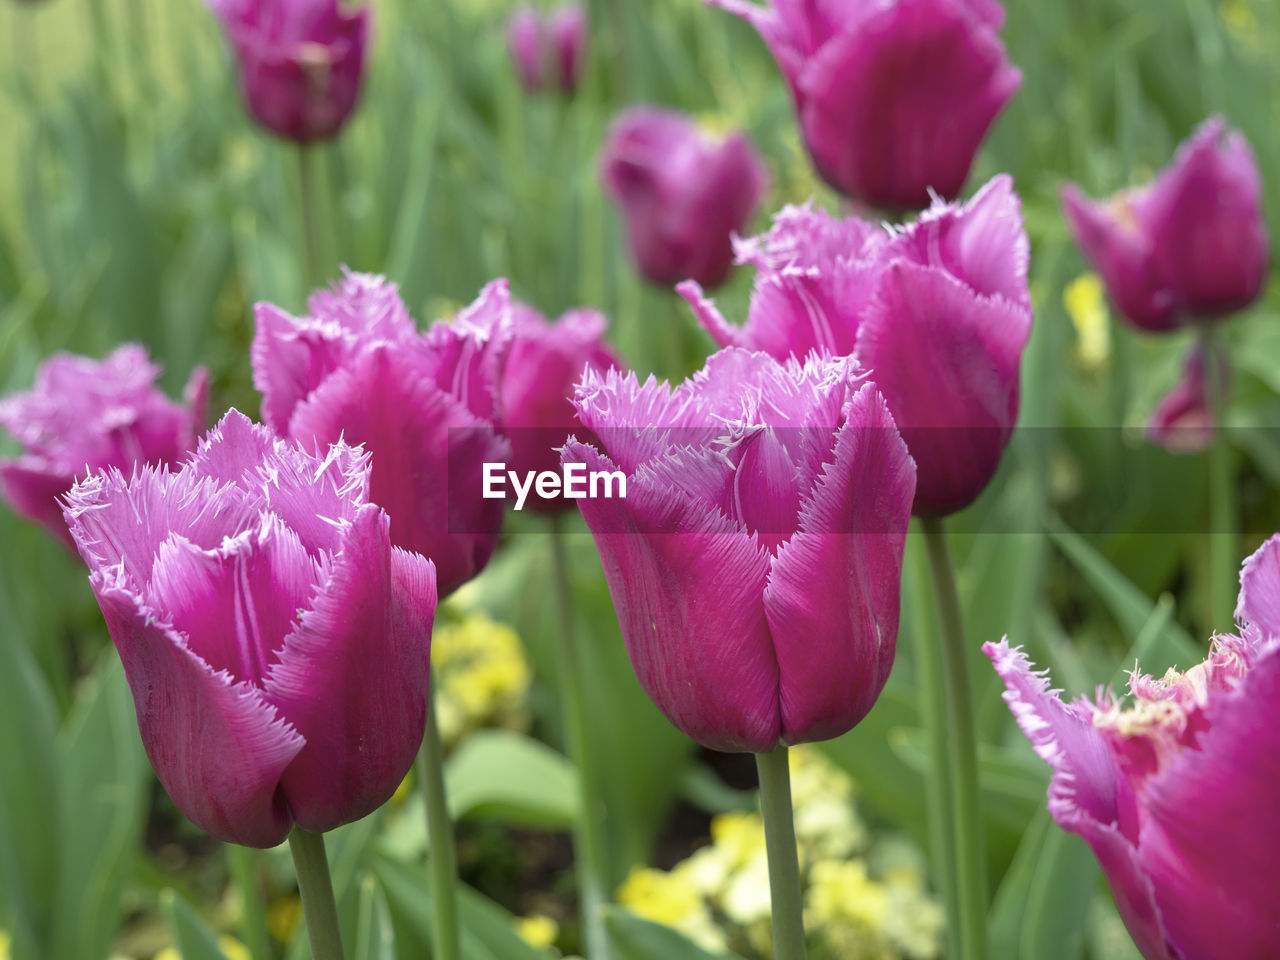 flower, flowering plant, plant, freshness, beauty in nature, close-up, pink, petal, nature, growth, fragility, tulip, flower head, purple, inflorescence, plant part, leaf, focus on foreground, no people, springtime, outdoors, blossom, green, selective focus, day, botany, garden, magenta, flowerbed, field, vibrant color, land